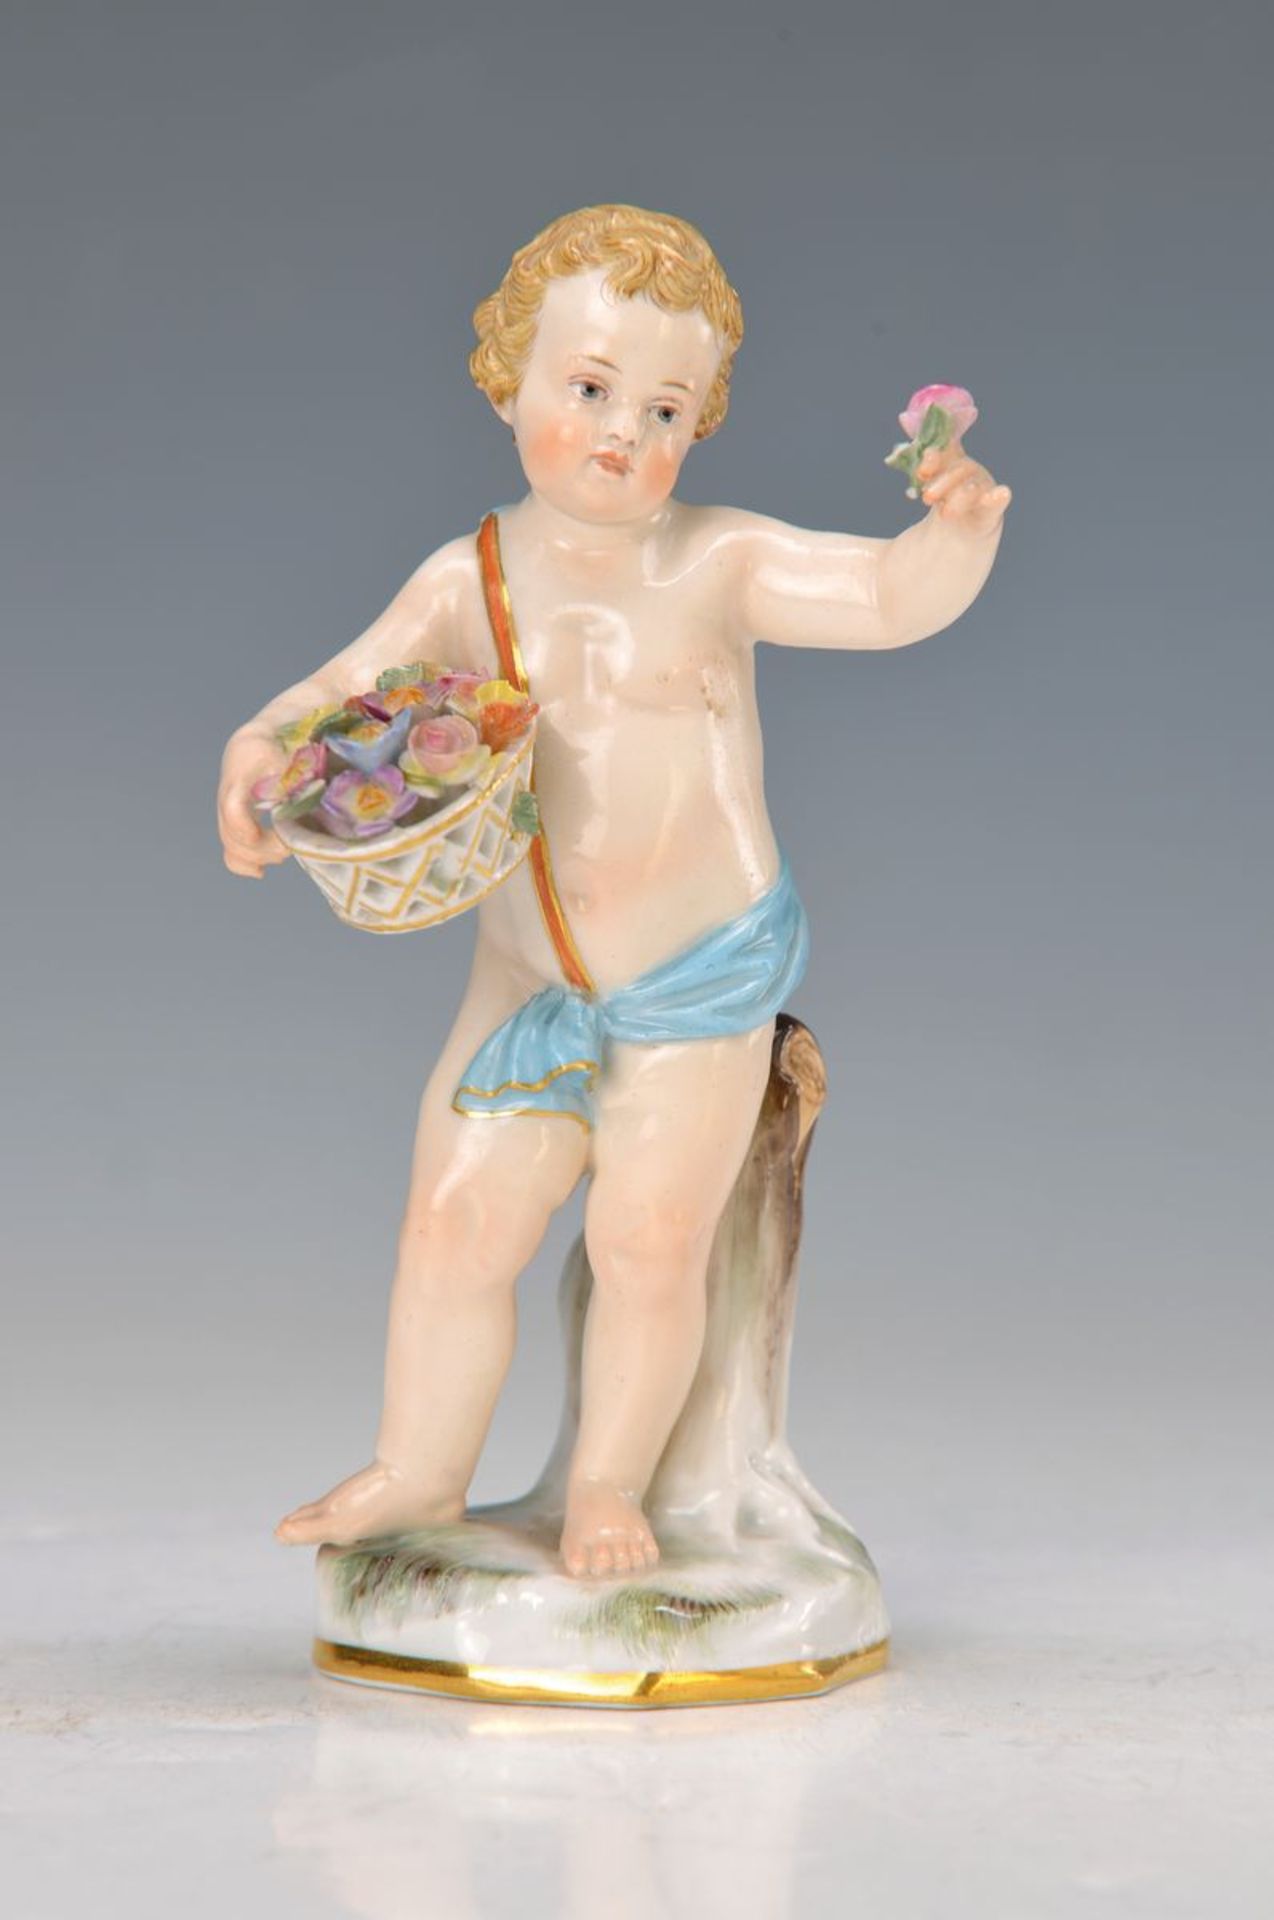 figurine, Meissen, around 1890, allegory on the spring, painted in bright colors, minor atthe